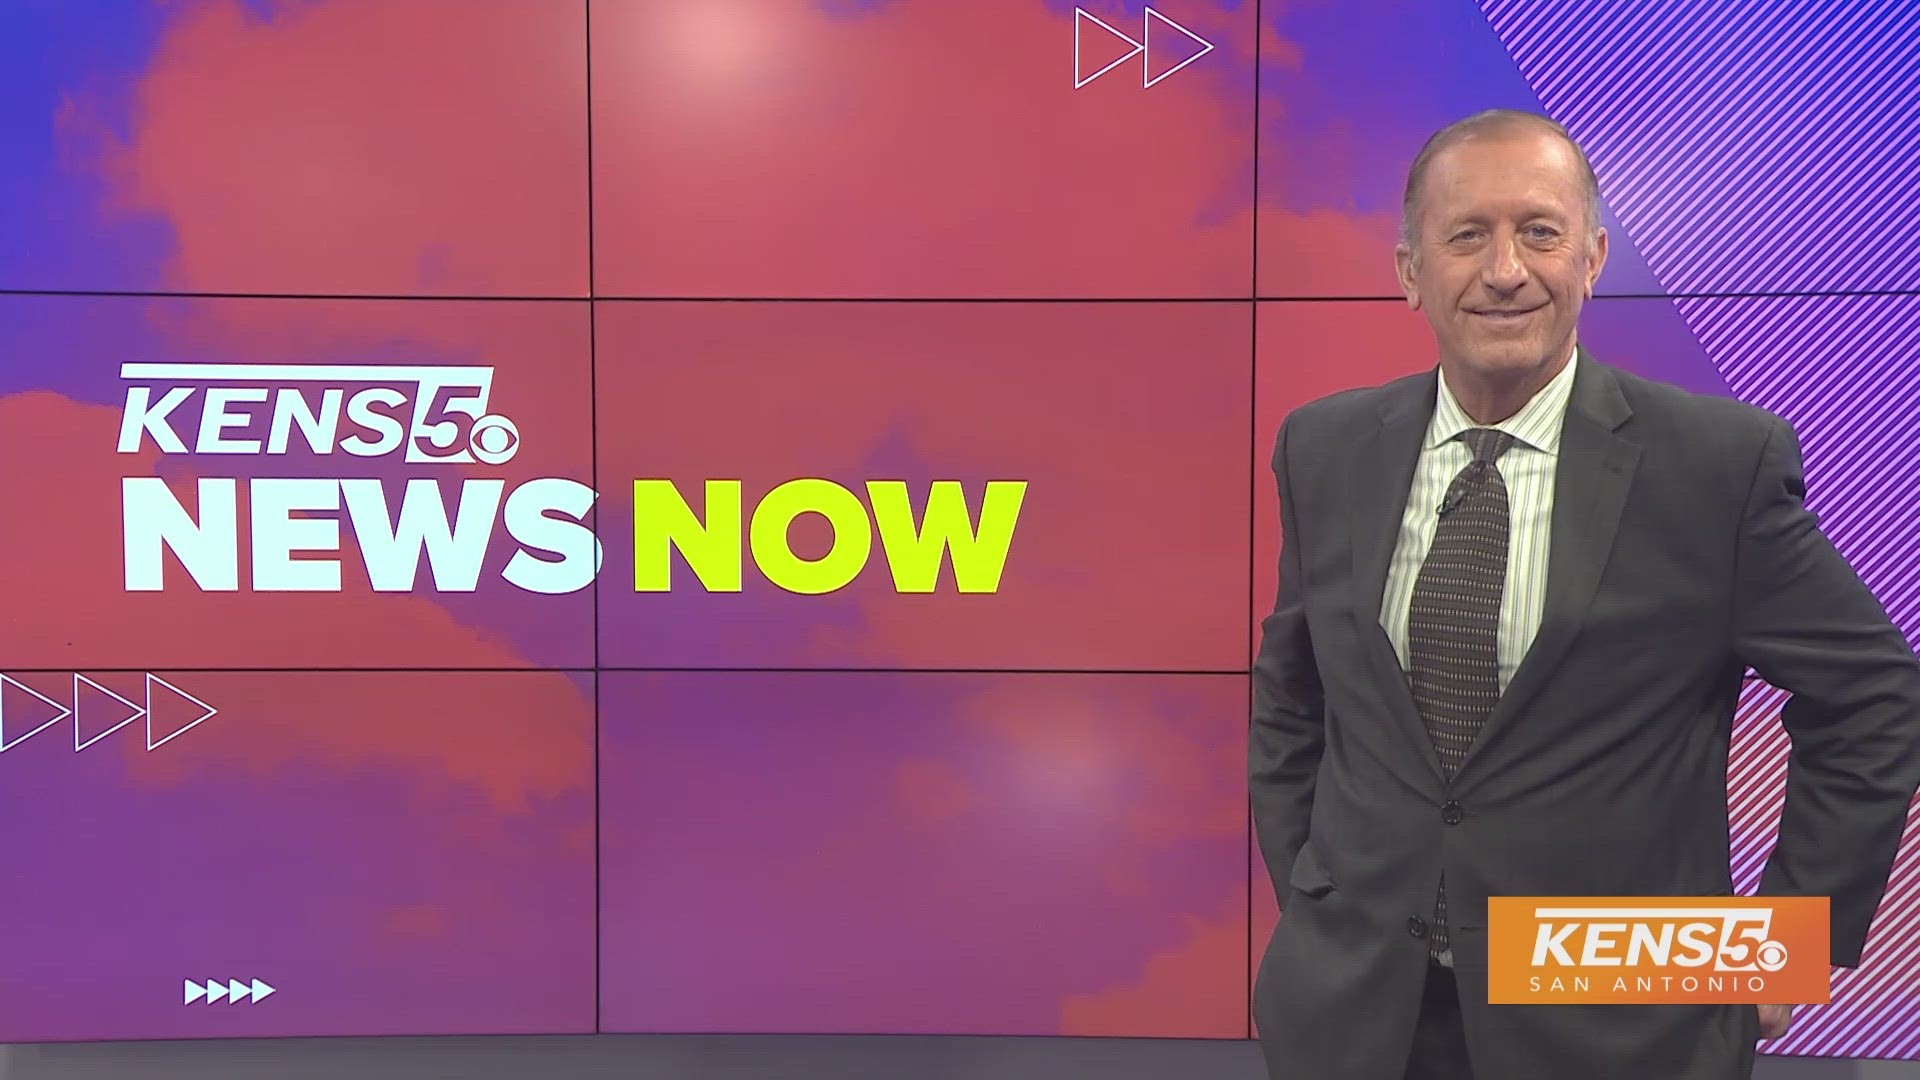 Follow us here to get the latest top headlines with the KENS 5 anchor team every weekday.